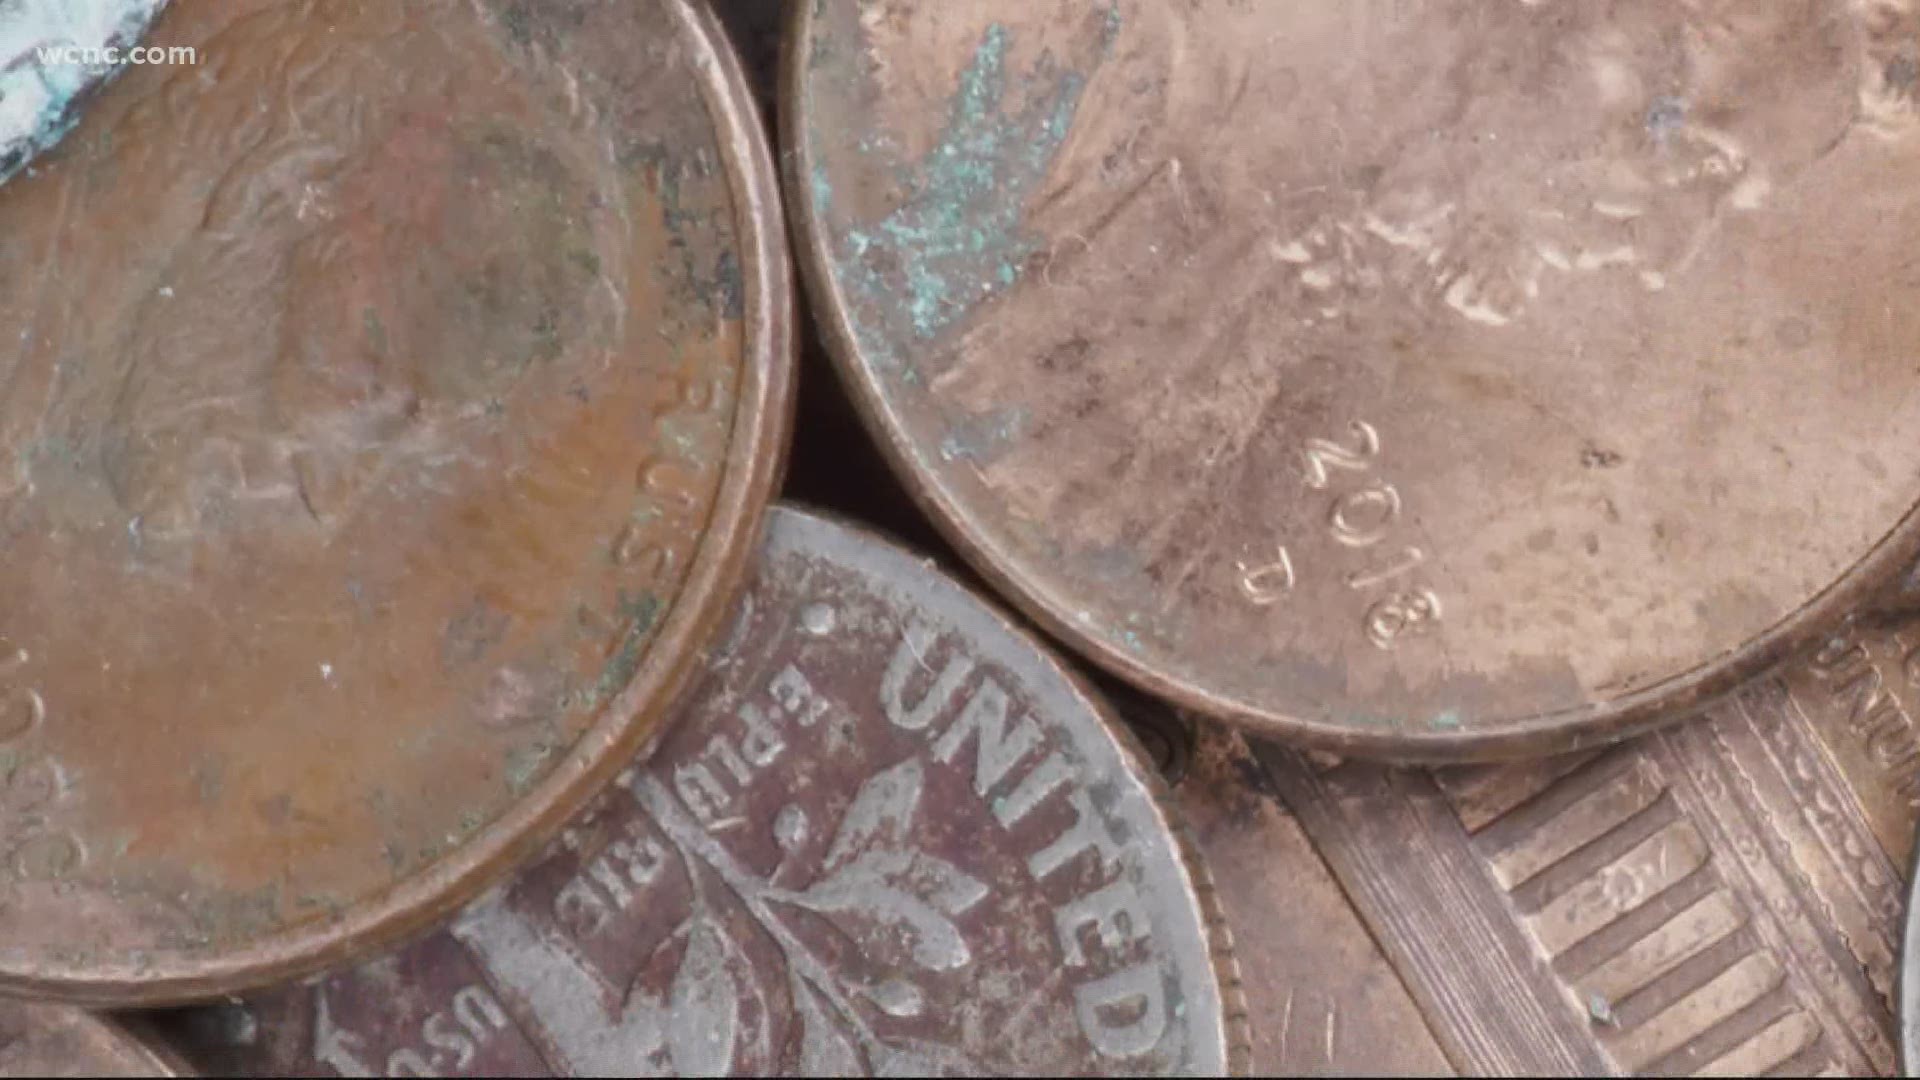 How the solution to this national coin shortage may already be in your garage